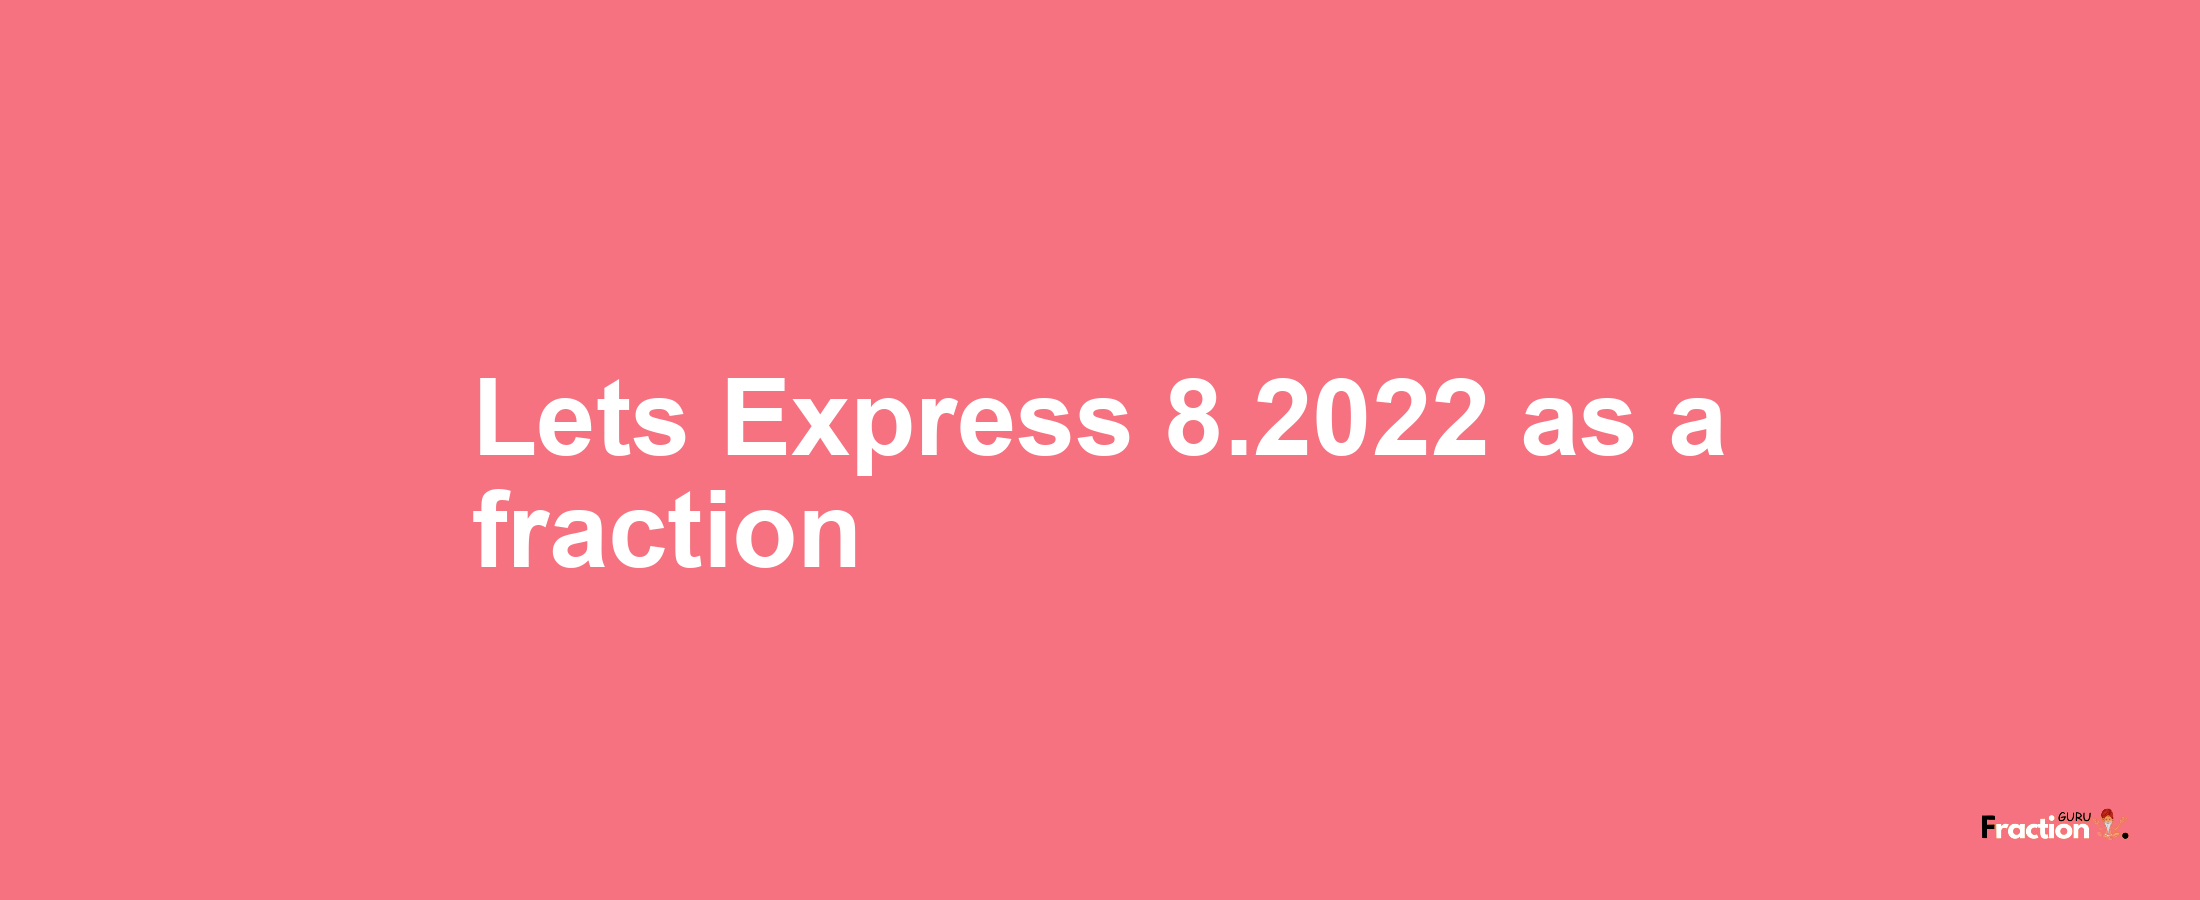 Lets Express 8.2022 as afraction